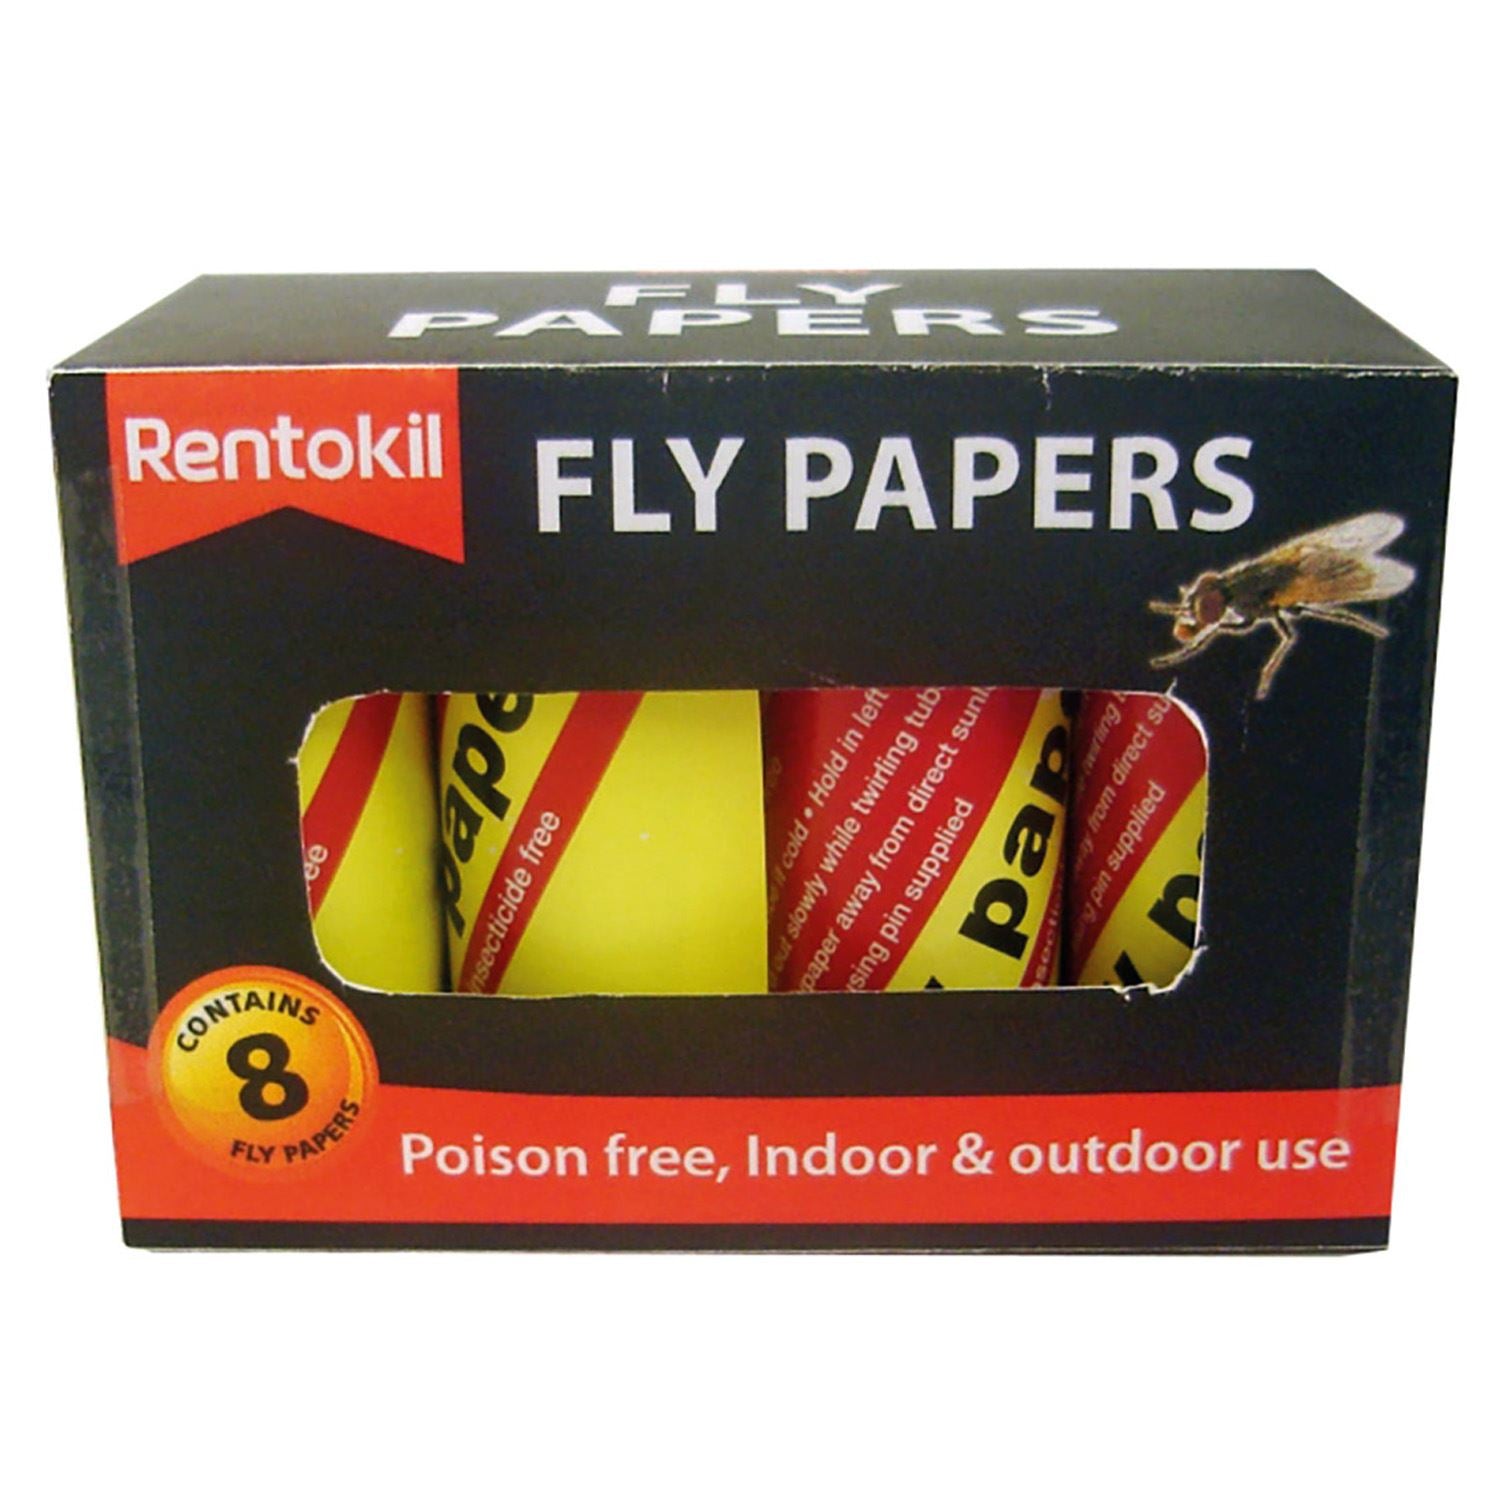 Rentokil Fly Papers - Just Horse Riders